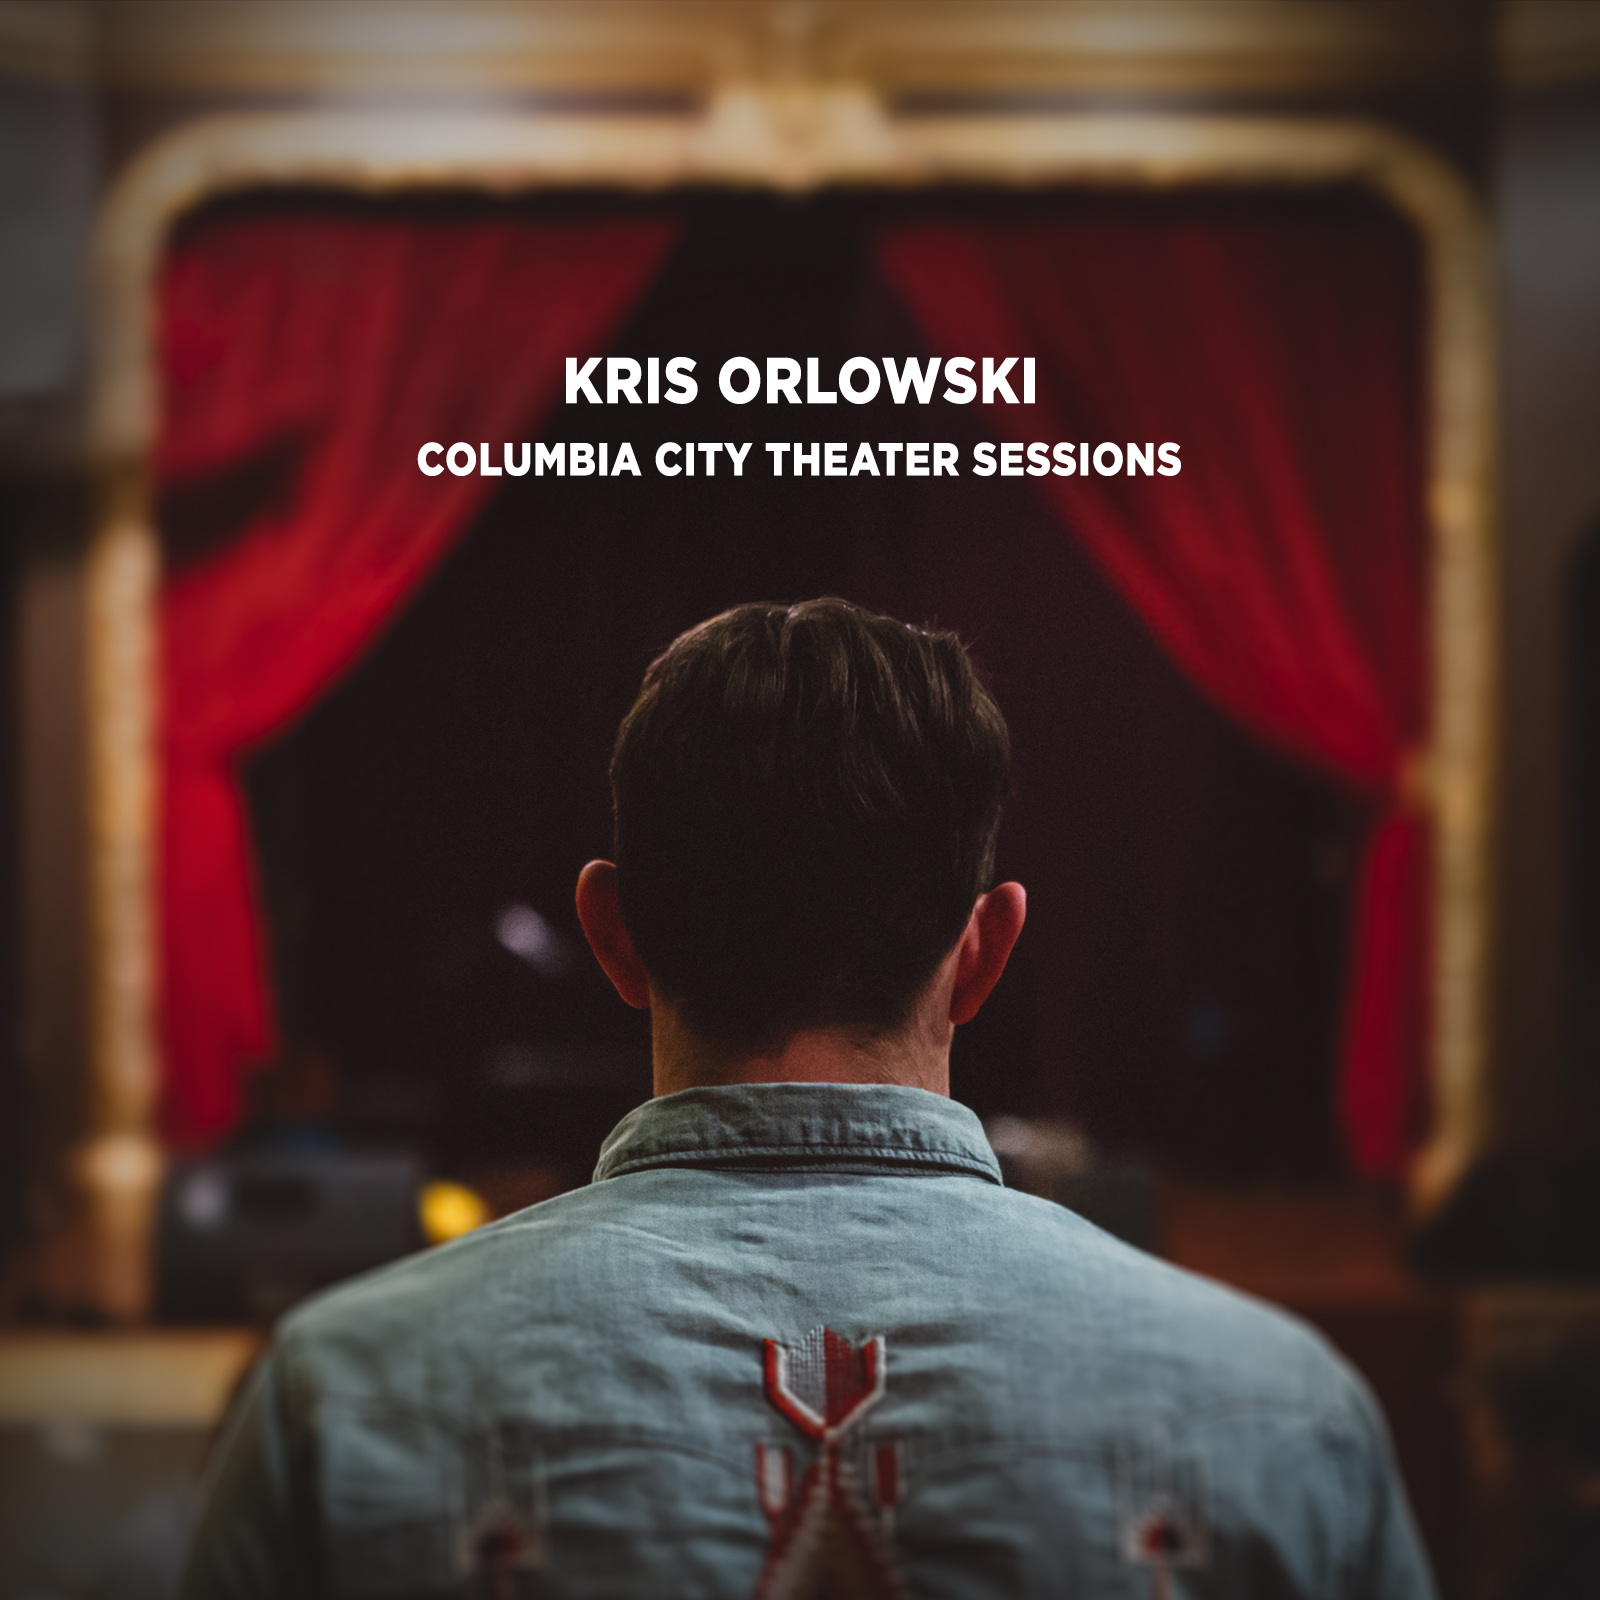 When Kris Orlowski released Believer last year, the album was promoted as